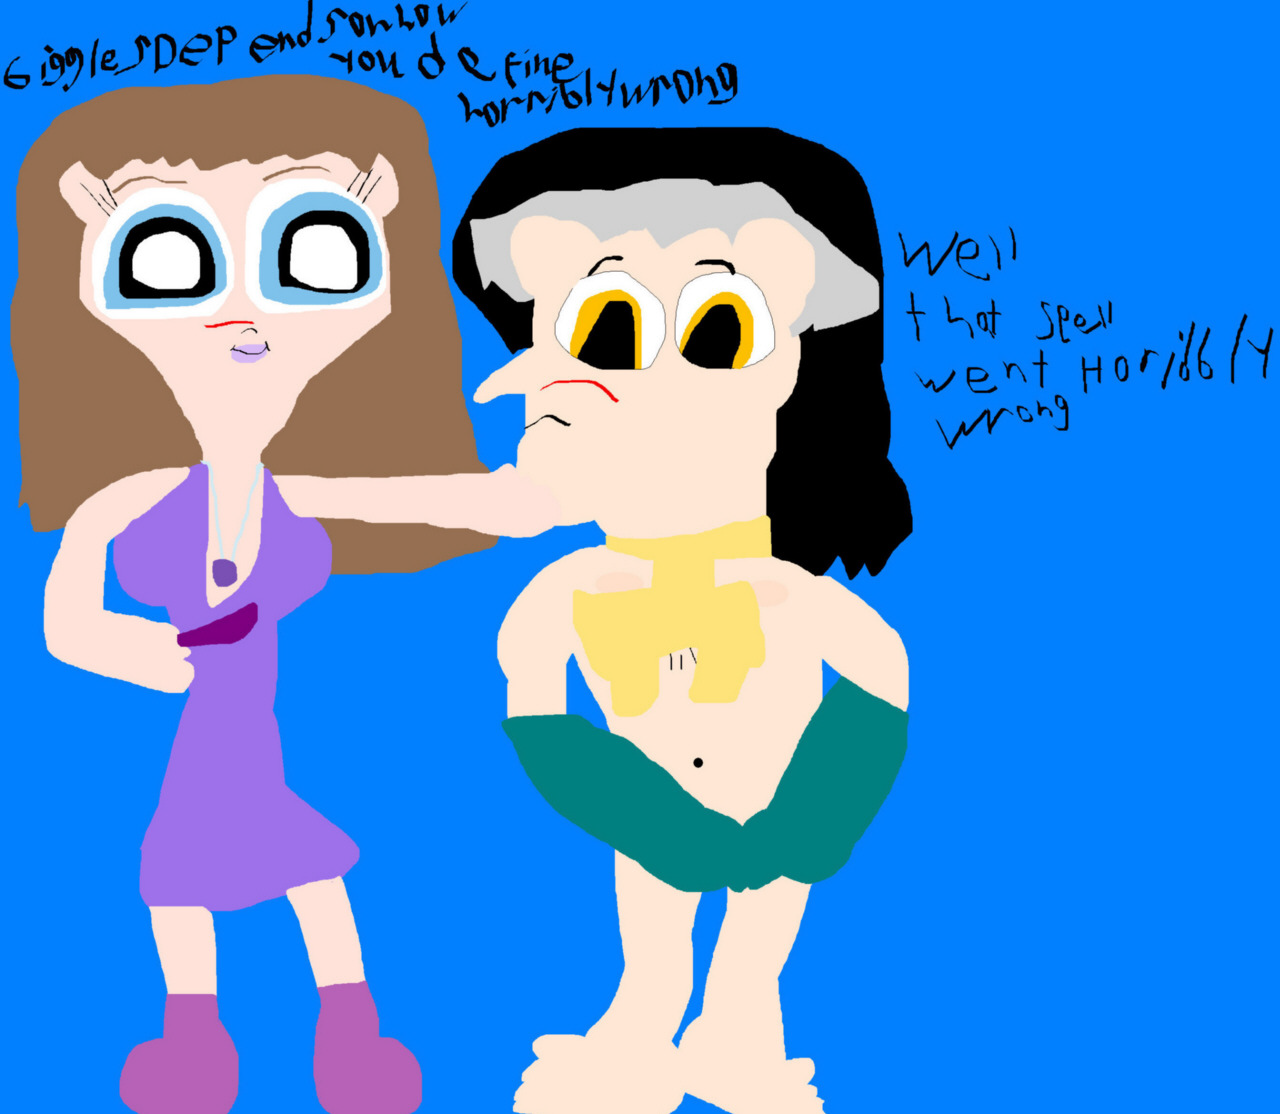 Cedfia A Spell Went Horribly Wrong MS Paint by Falconlobo